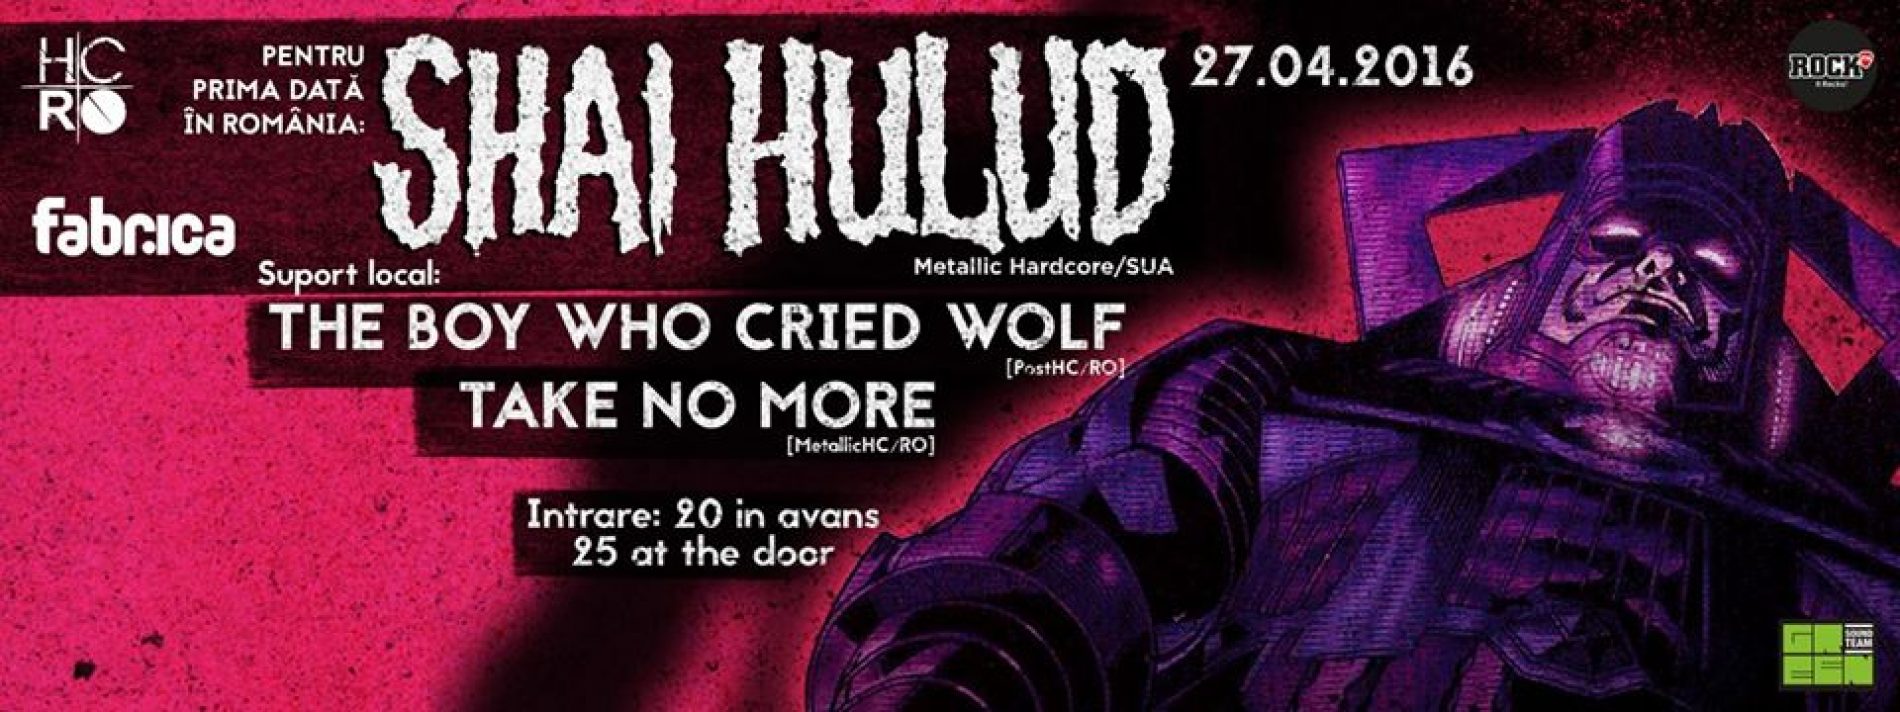 Concert: Shai Hulud (USA), TBWCW si Take No More in fabrica